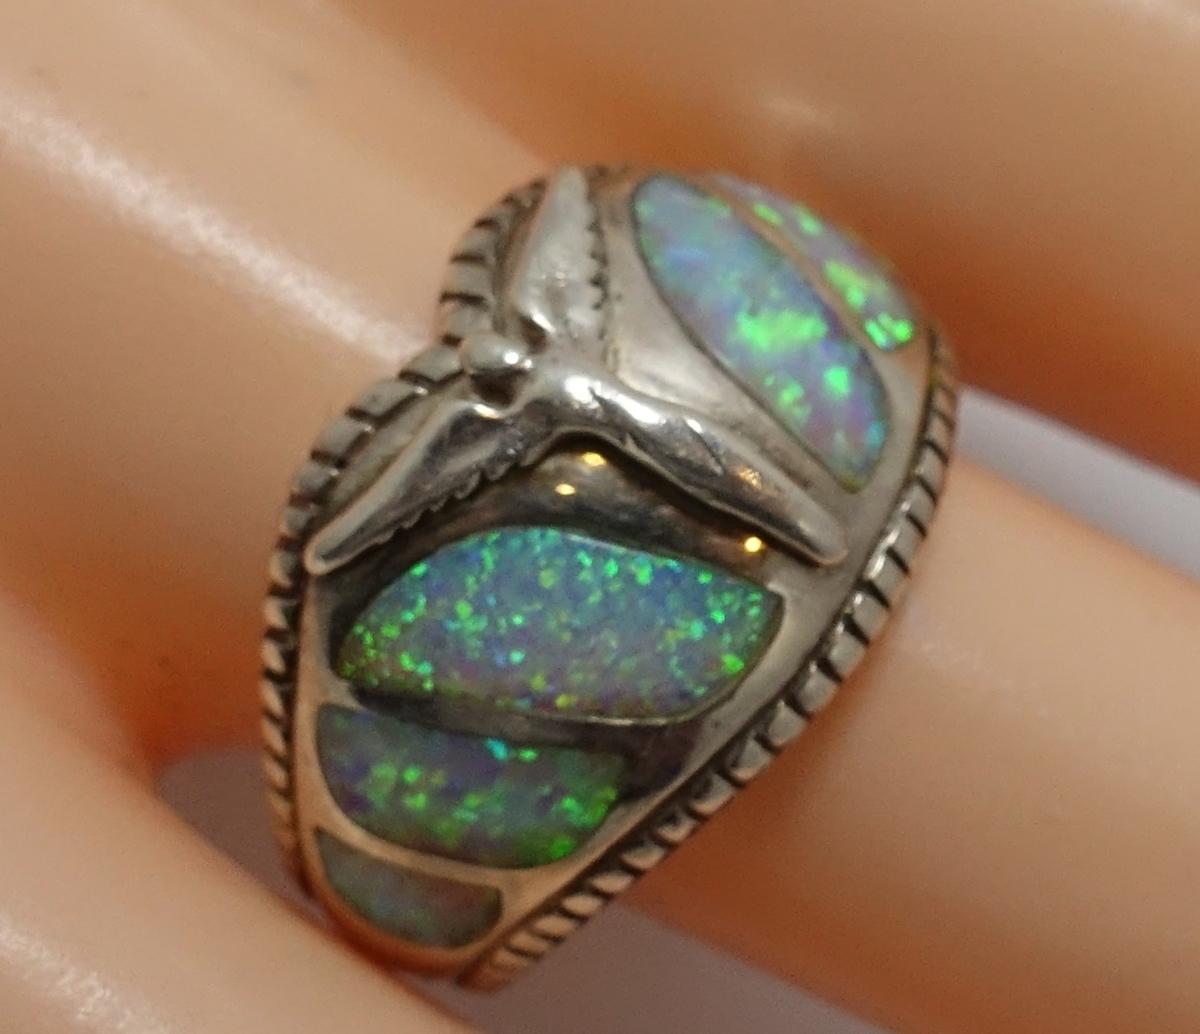 This vintage signed Lavaggi ring features an angel with wings with opal stones in a sterling silver setting.  A size 9, this ring measures ½” wide, is signed “Lavaggi” and is in excellent condition.